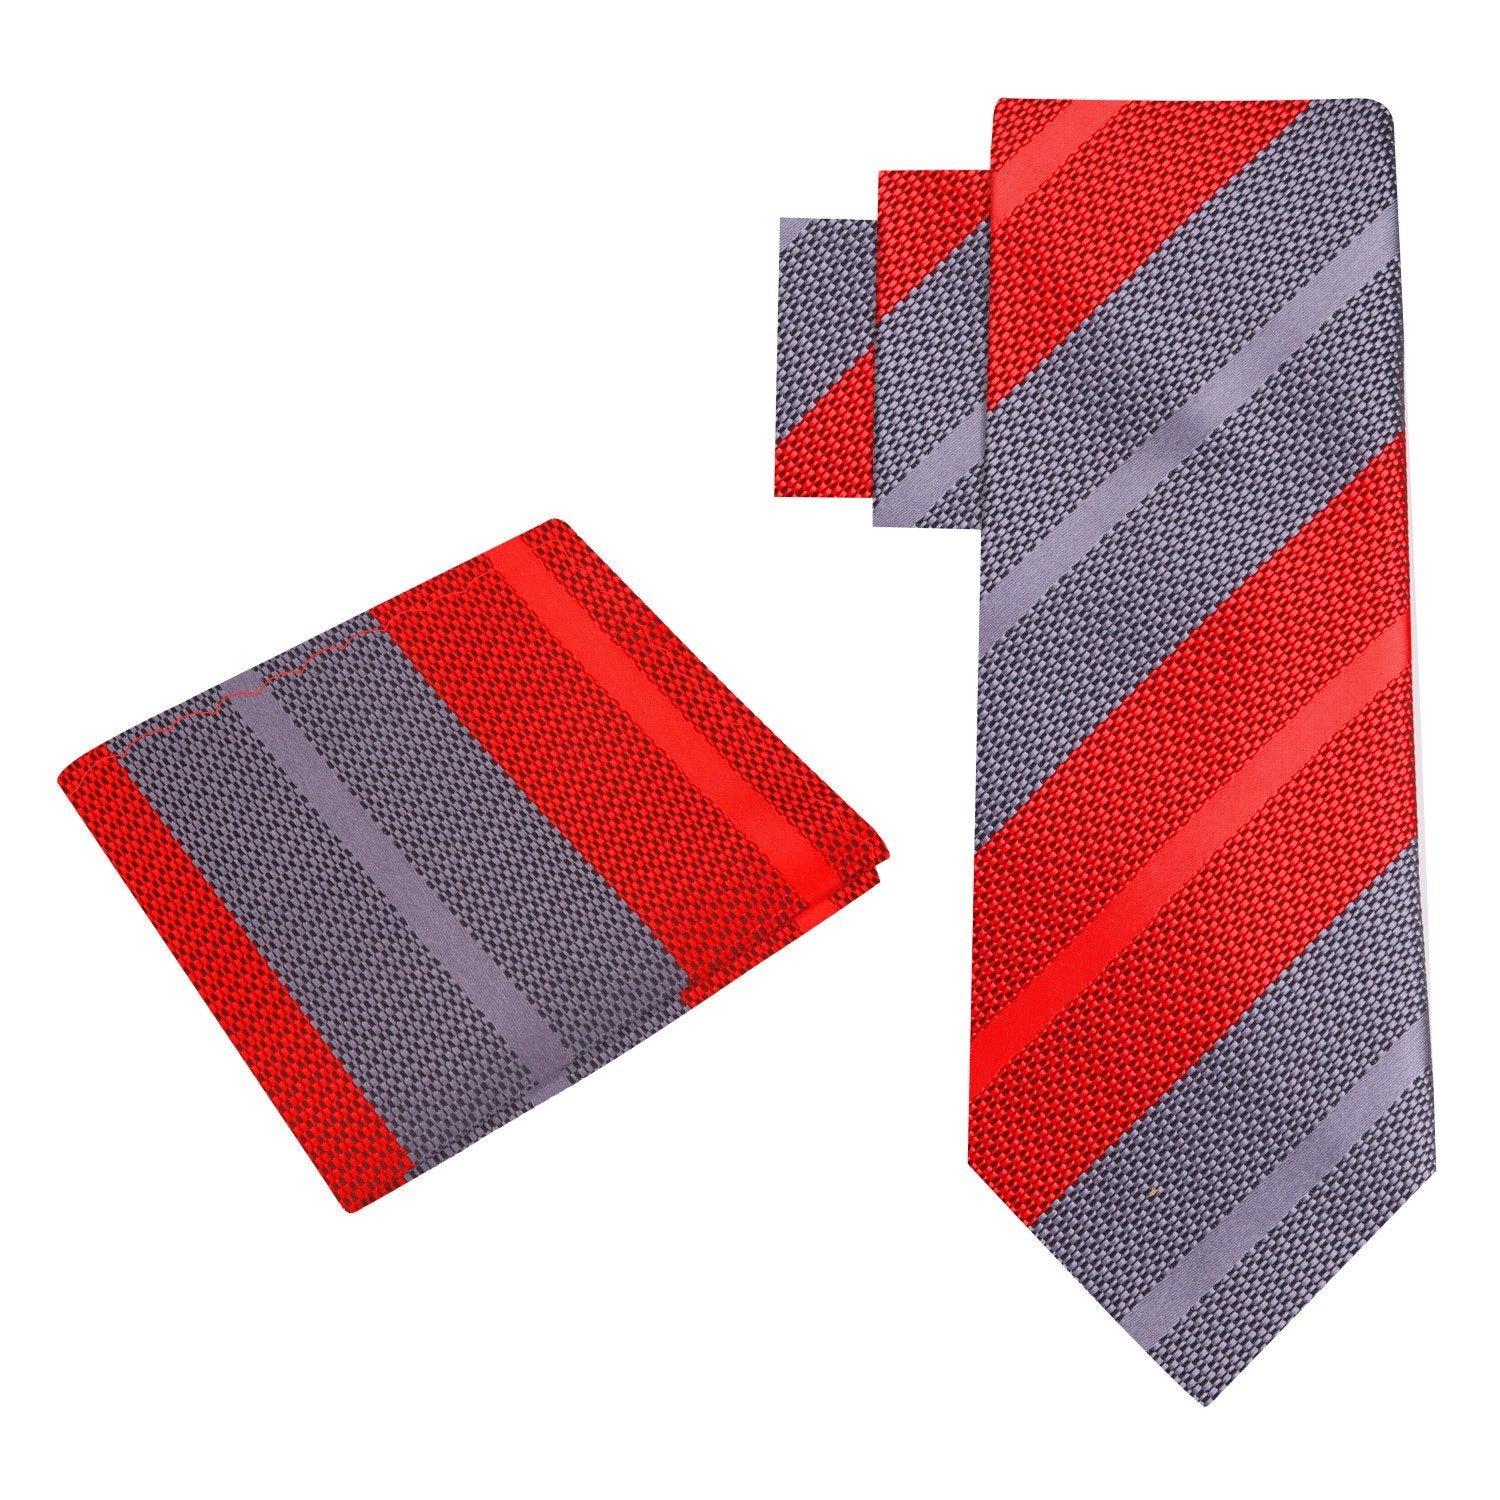 Alt View: Red/Grey Stripe Tie and Pocket Square